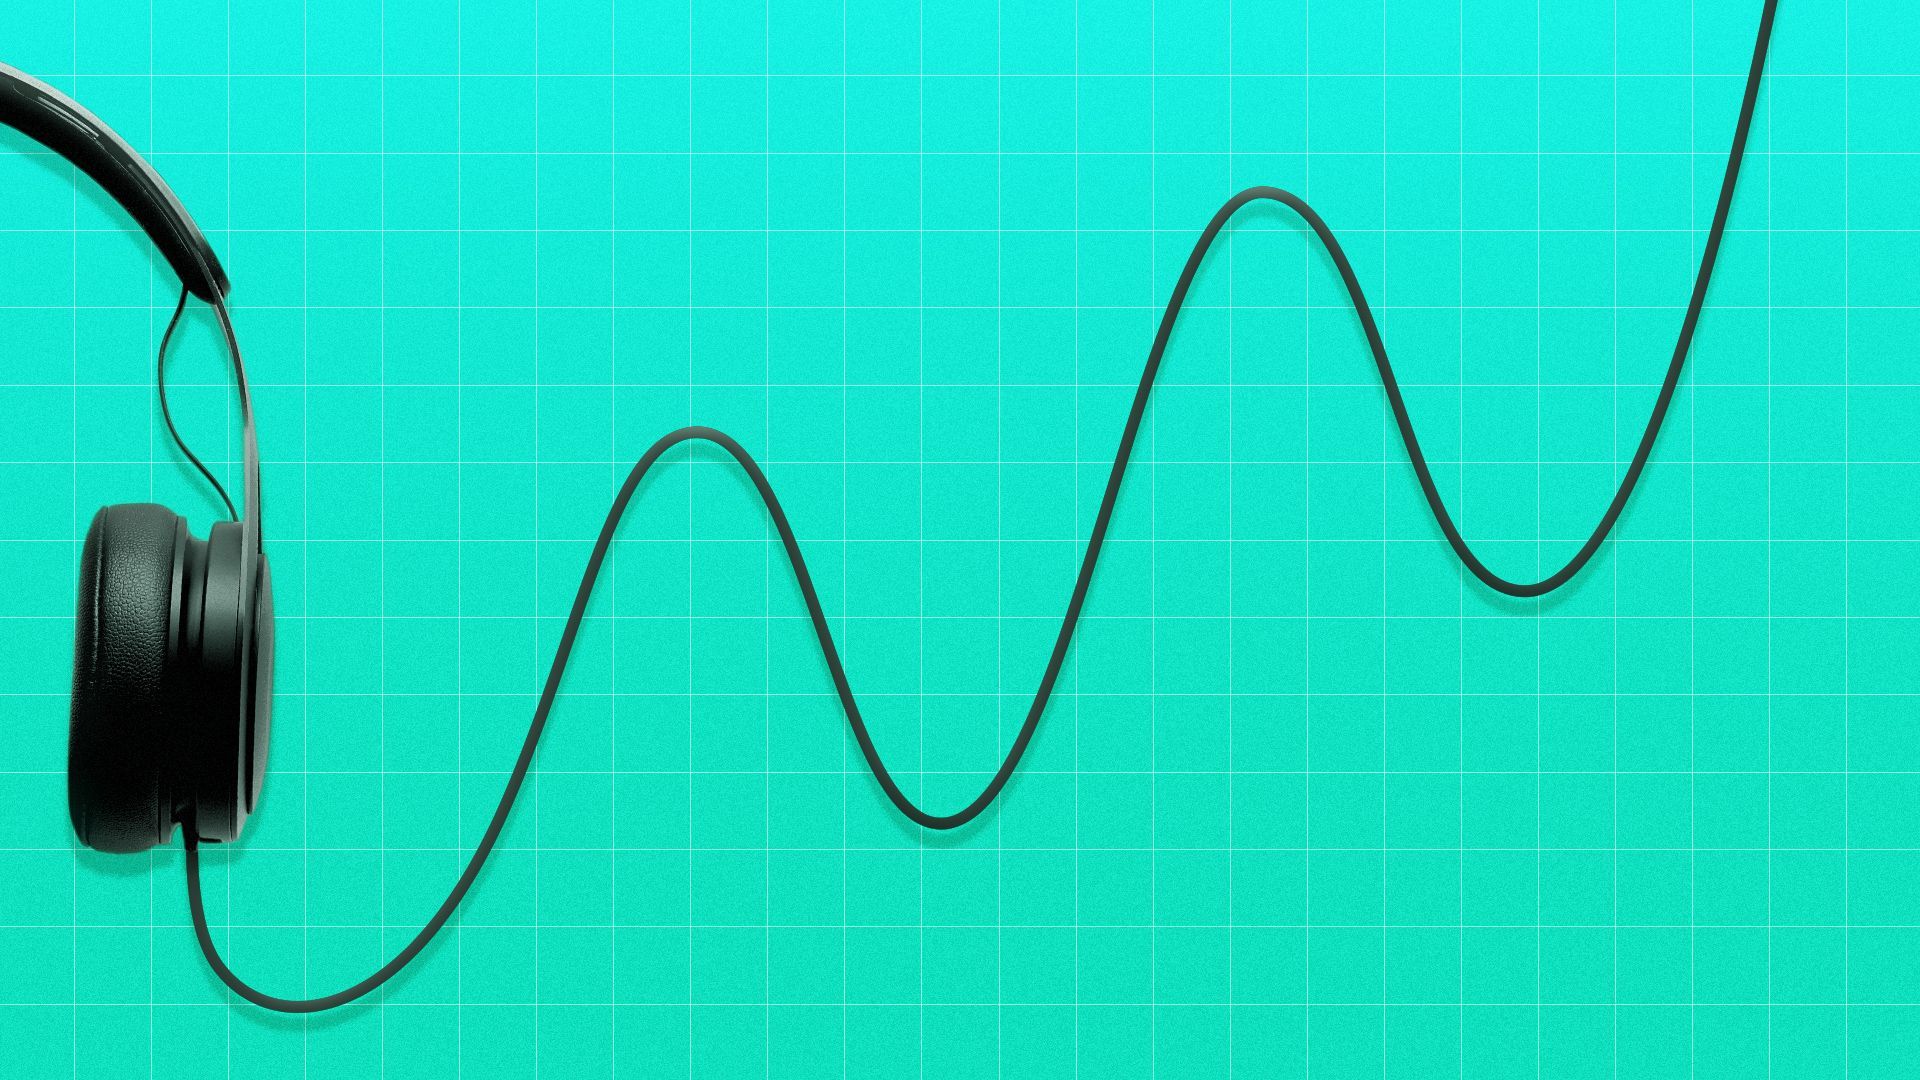 Illustration of the wire from a pair of over-ear headphones forming an upward trendline.